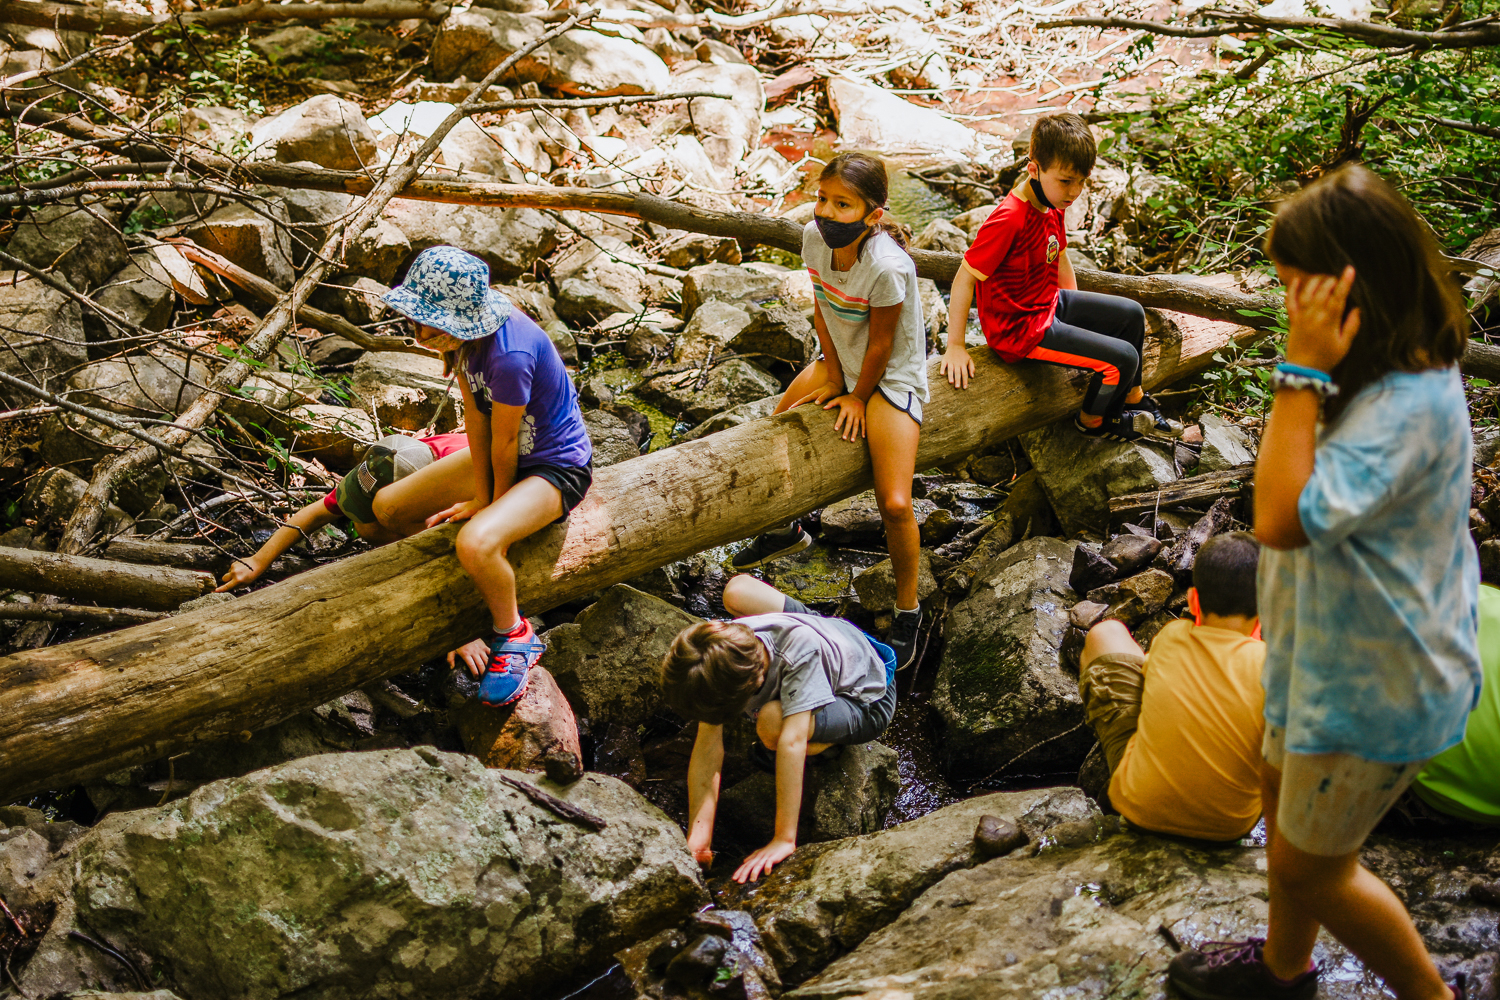 A group of campers climbs a fallen tree trunk in a dry streambed at Moose Hill Nature Camp